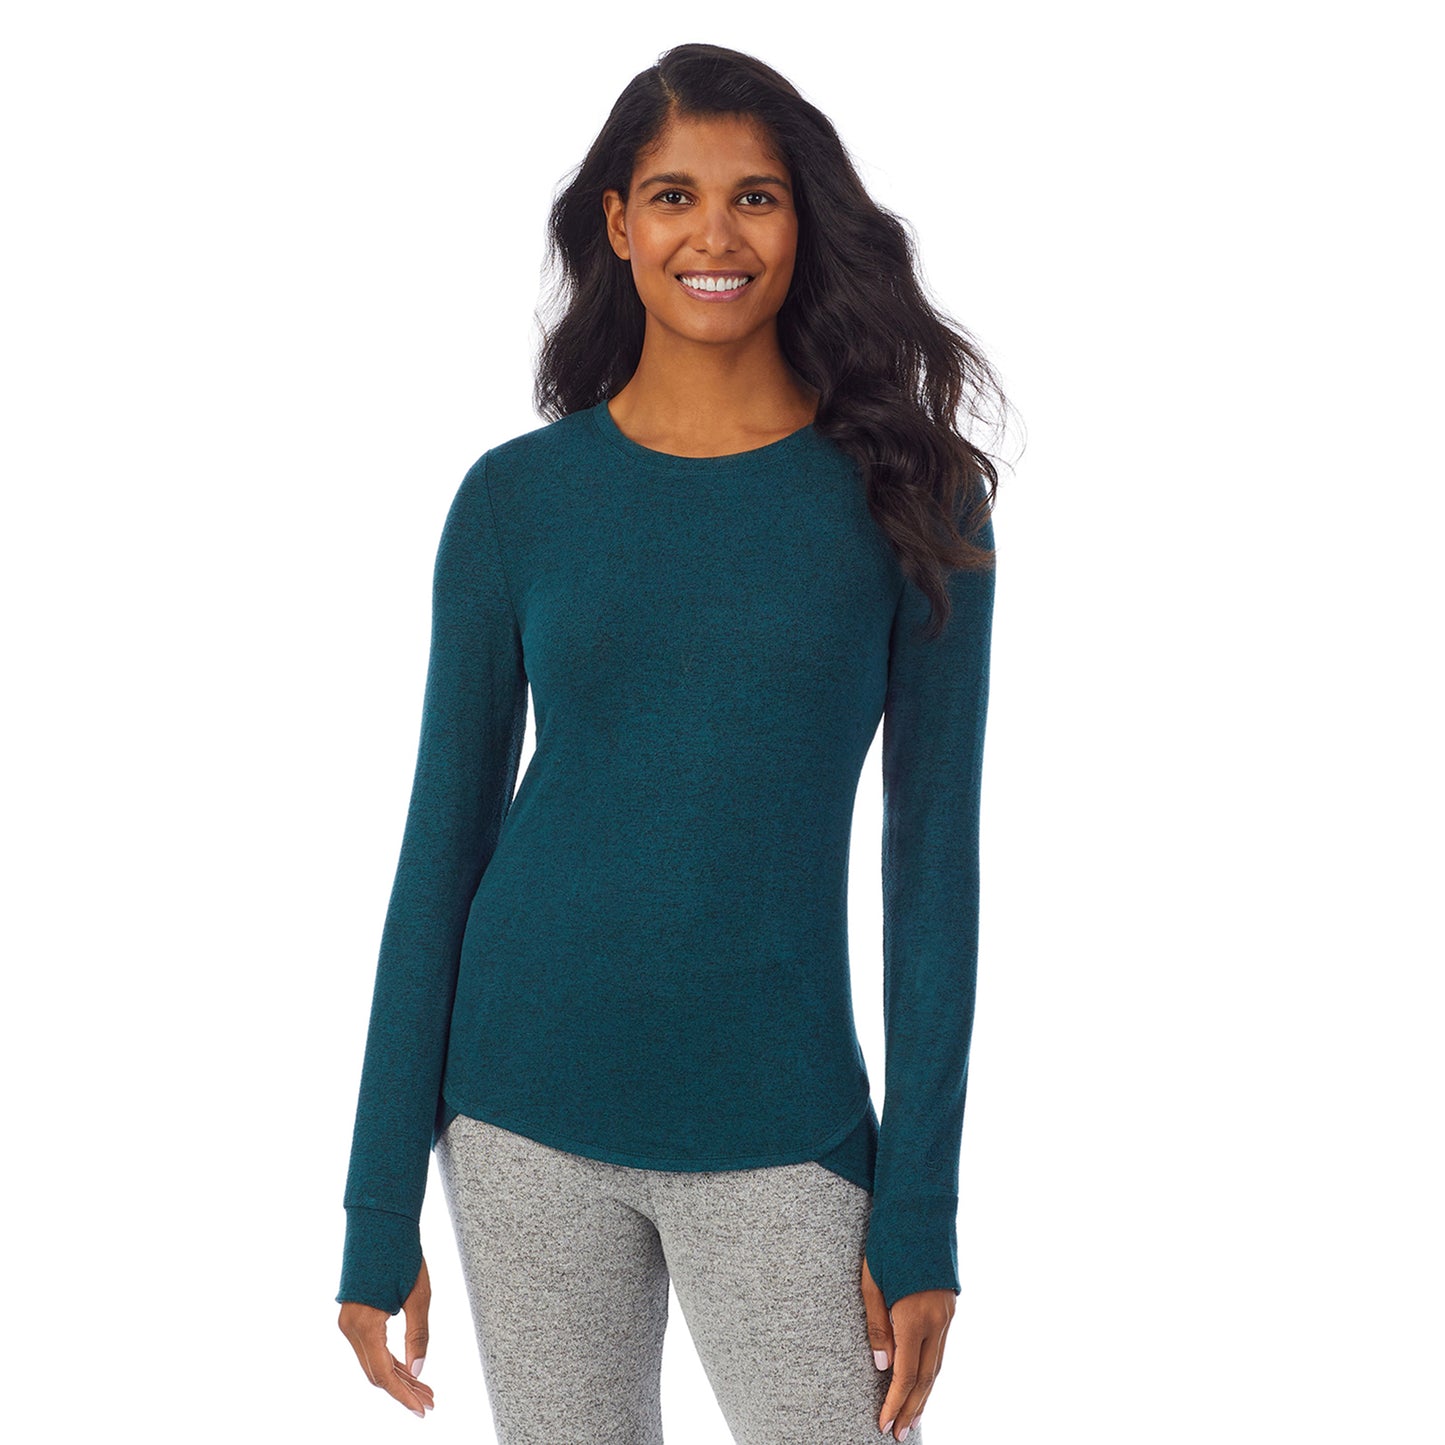 Marled Viridian Green; Model is wearing size S. She is 5’10”, Bust 34”, Waist 24”, Hips 34”. @A lady wearing a marled viridian green long sleeve crew.